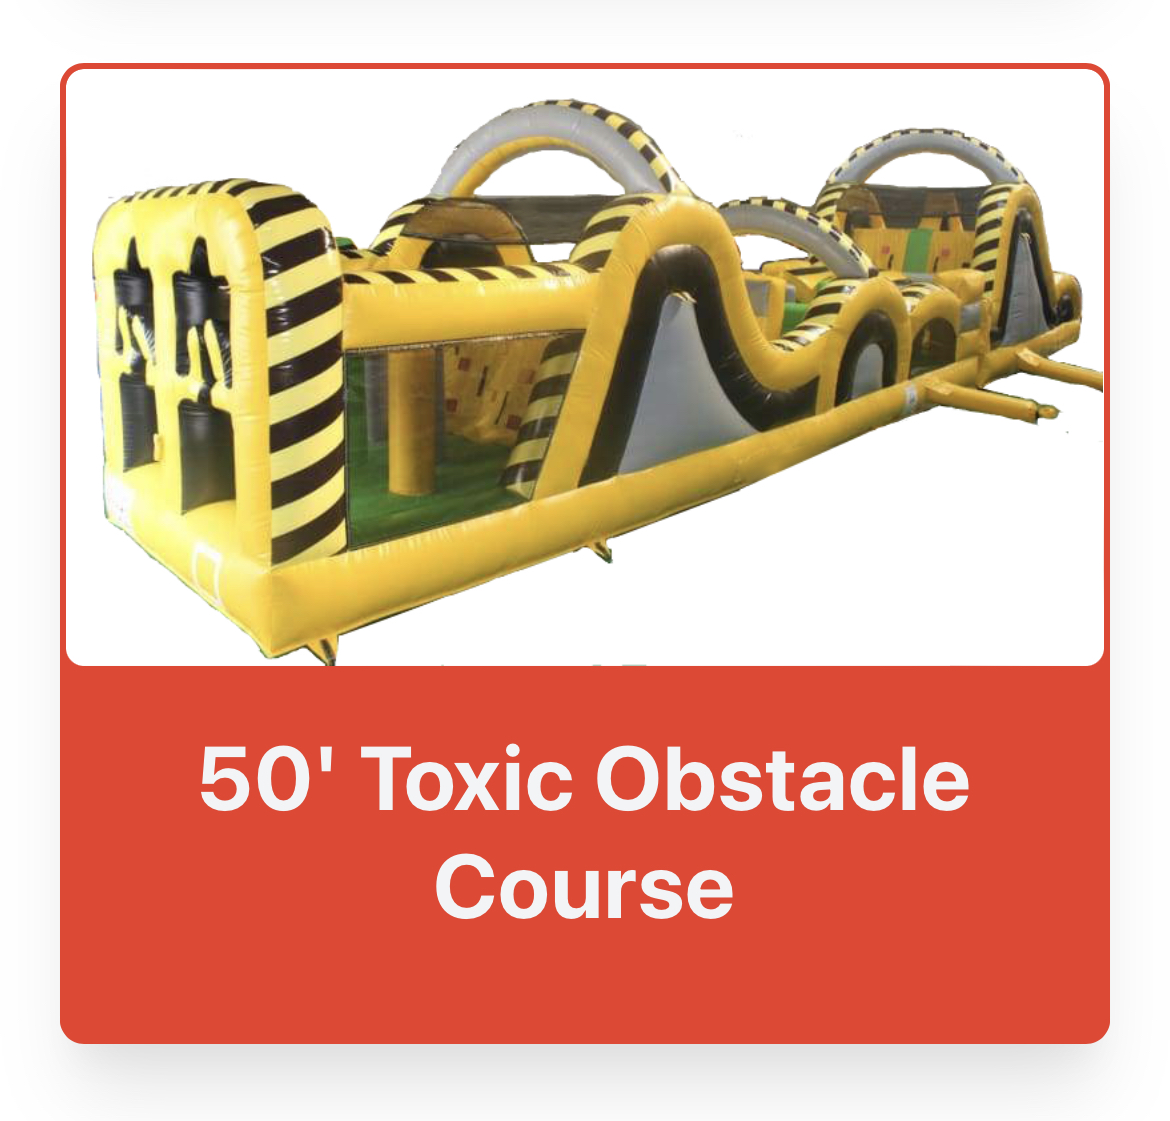 Toxic Obstacle Course